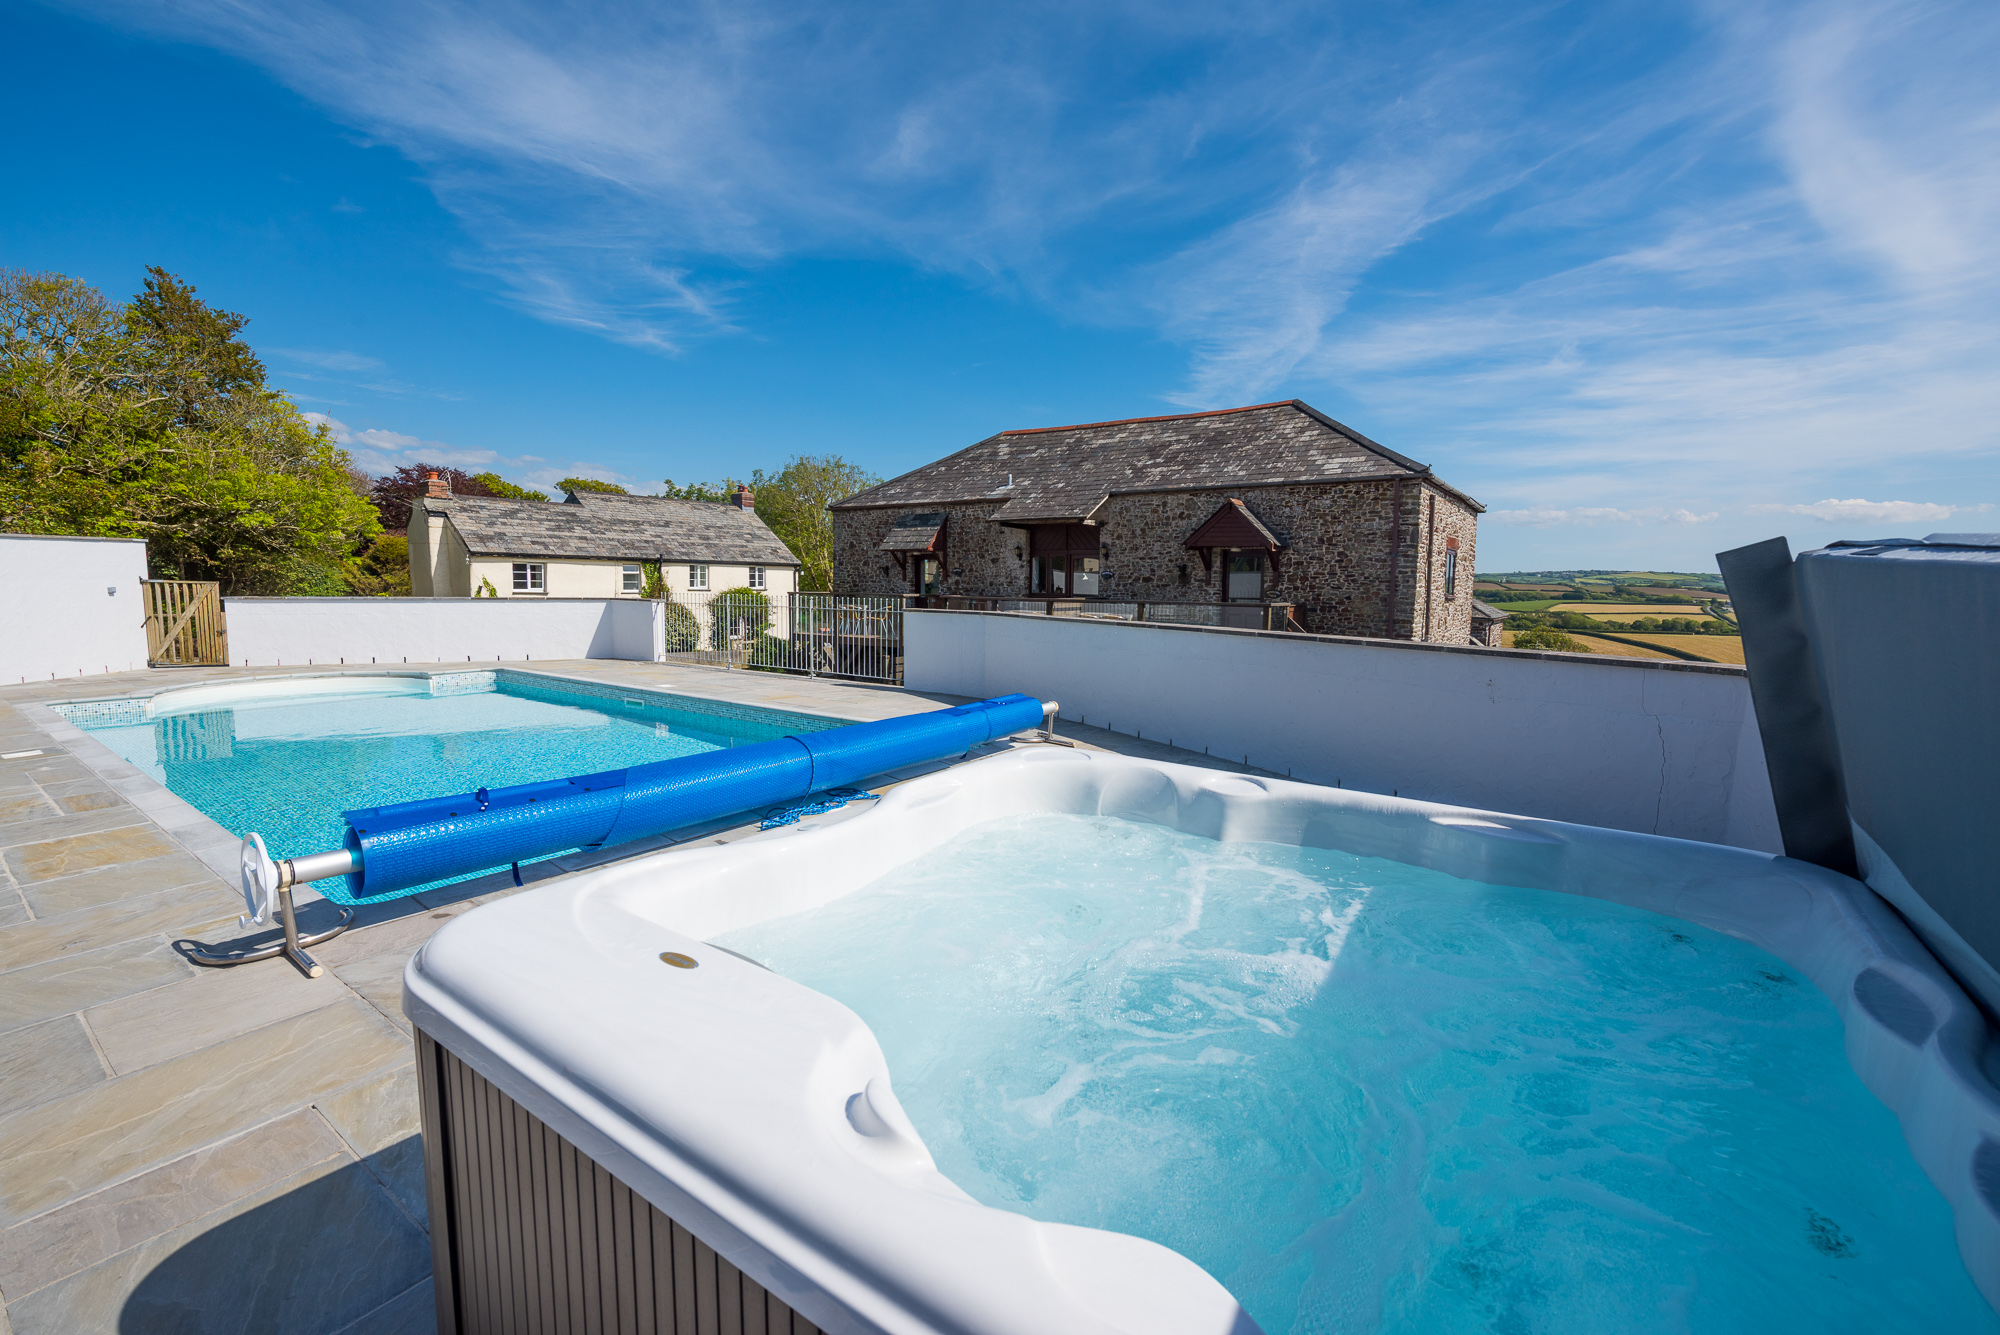 Our heated outdoor pool is open Easter-September. Our hot tub is open all year.